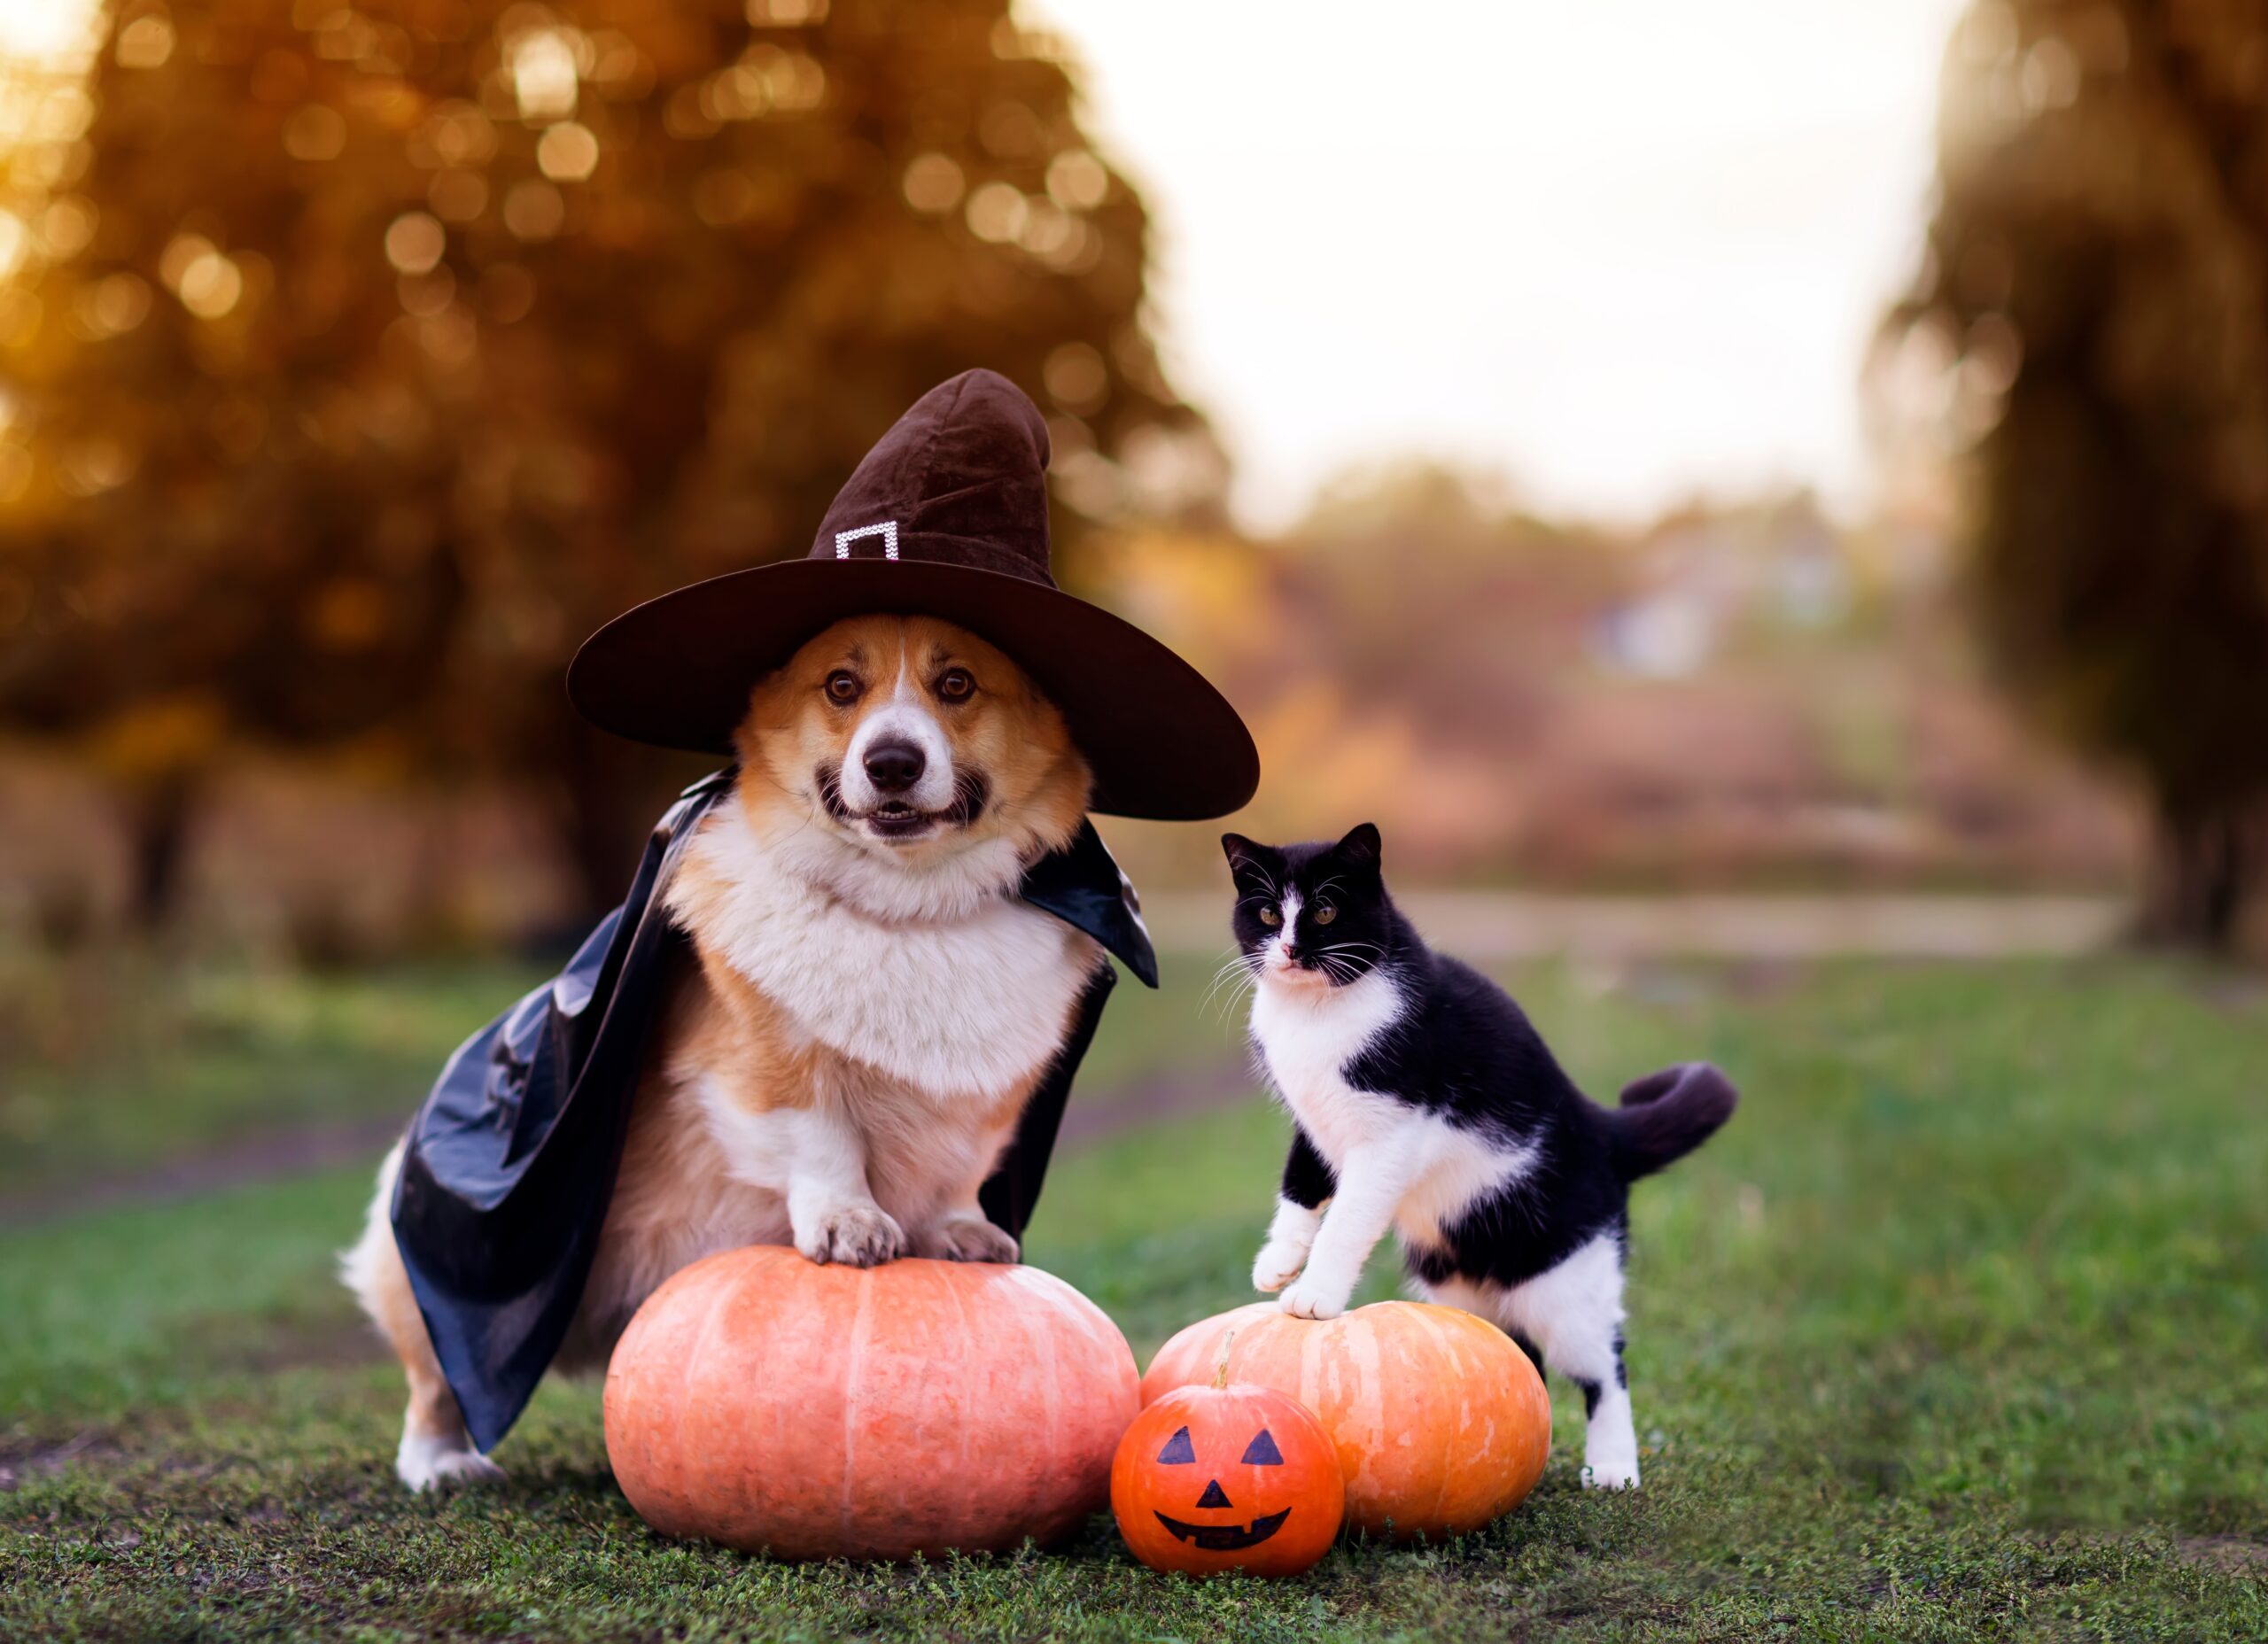 Risk of pets being poisoned by candy around Halloween